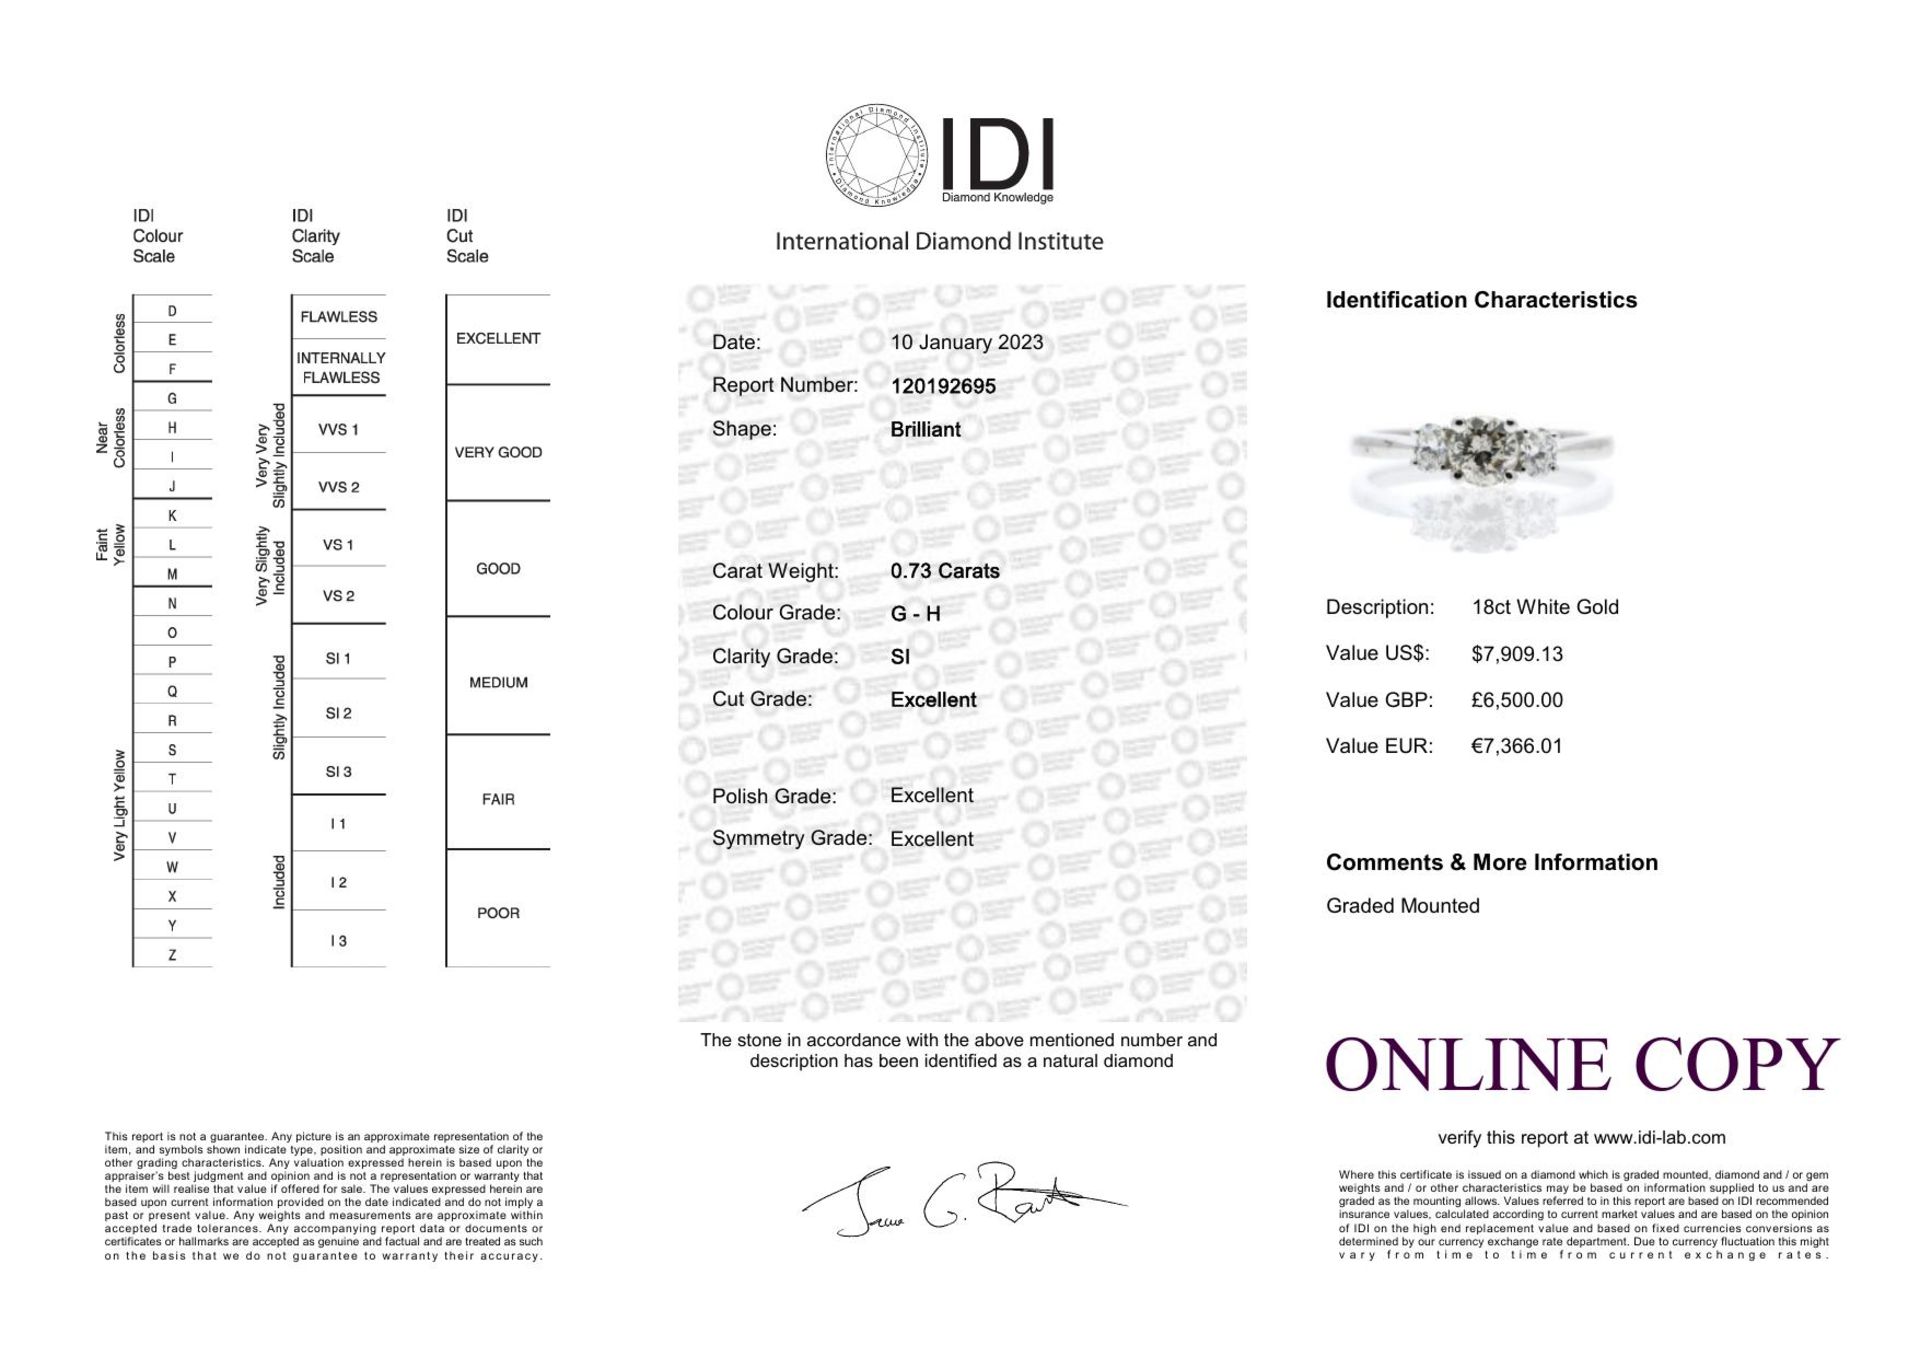 18ct White Gold Three Stone Claw Set Diamond Ring 0.73 Carats - Valued By IDI £6,500.00 - A - Image 5 of 5